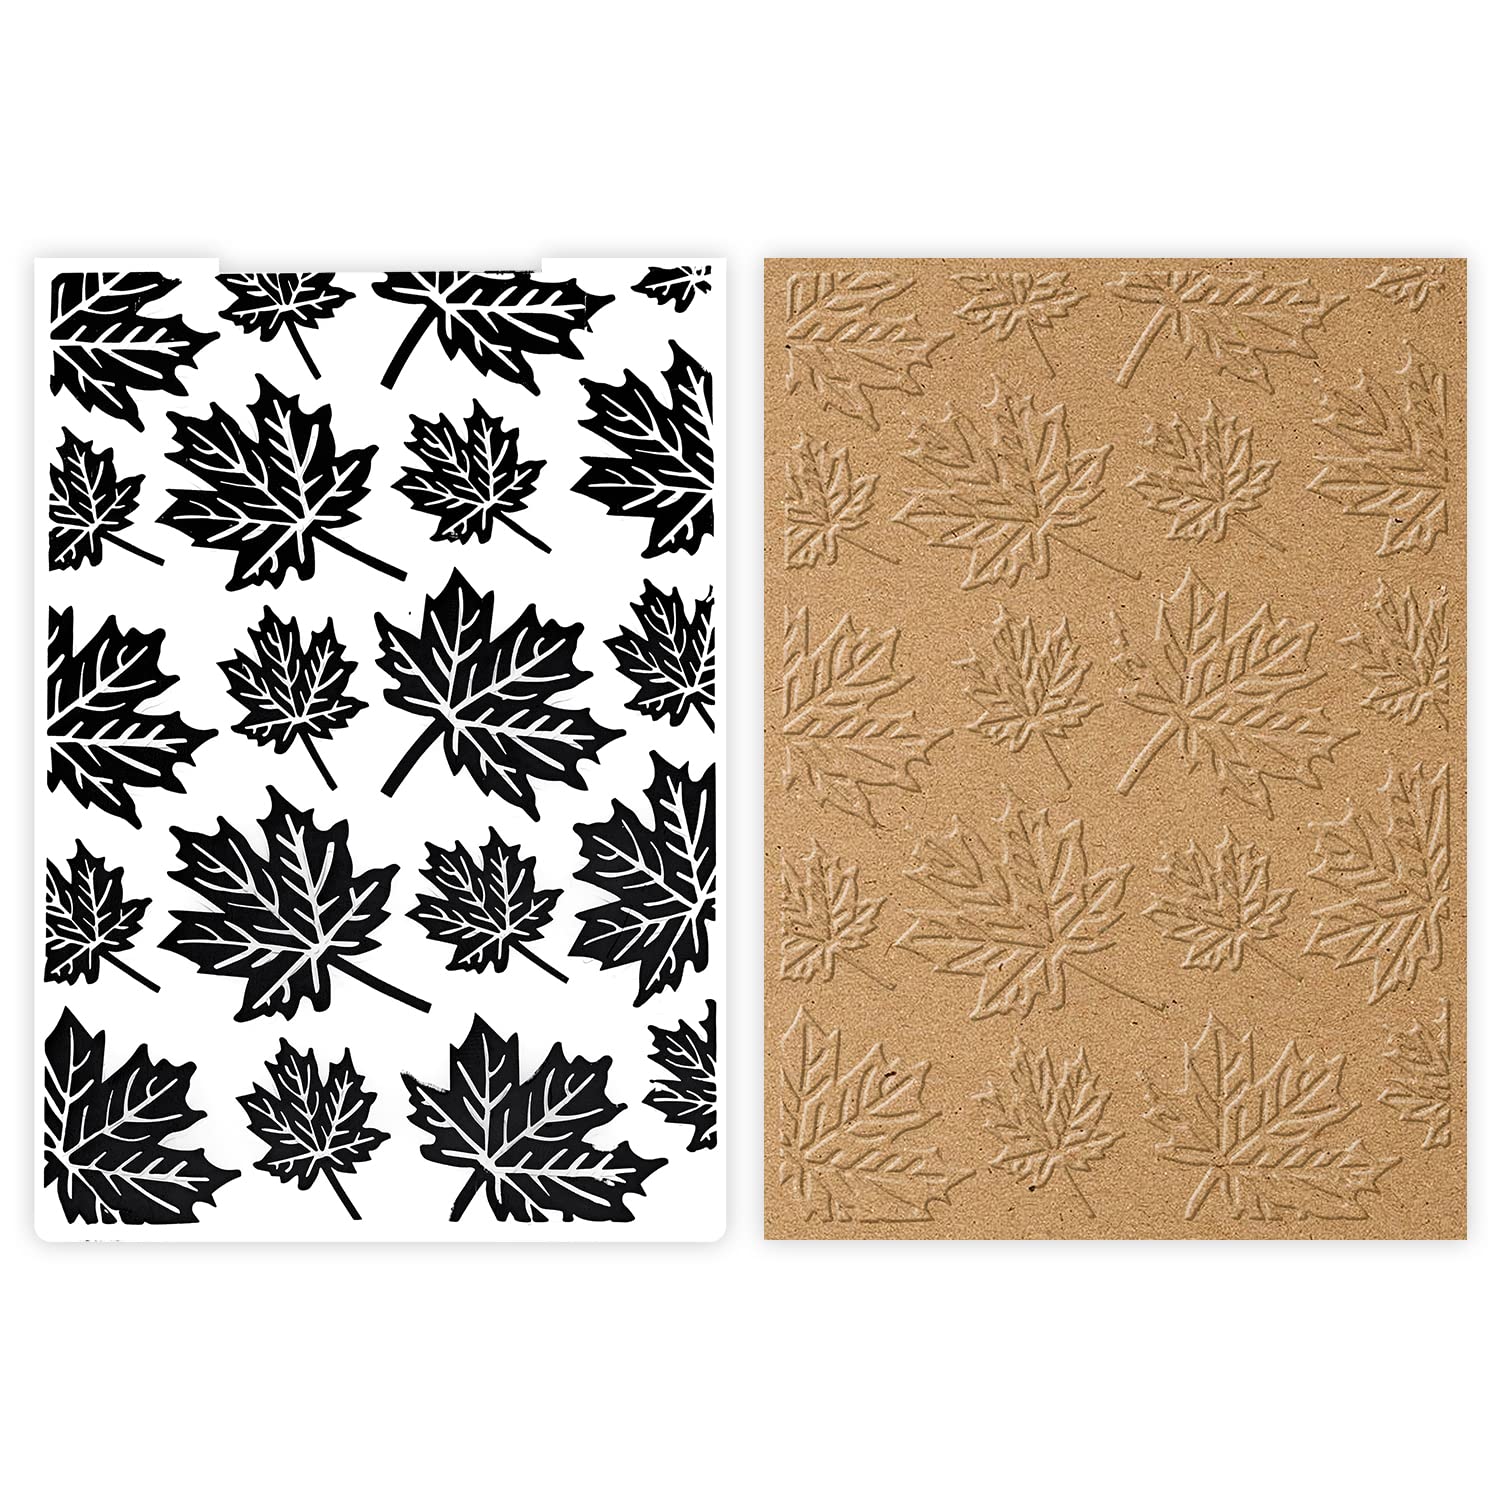 KINBOM Embossing Folder 5.8x4 Inch Plastic Embossing Folders for Card  Making Embossing Machine Template for Scrapbook Paper Craft Album Stamps  DIY D cor (Maple Leaf Style)